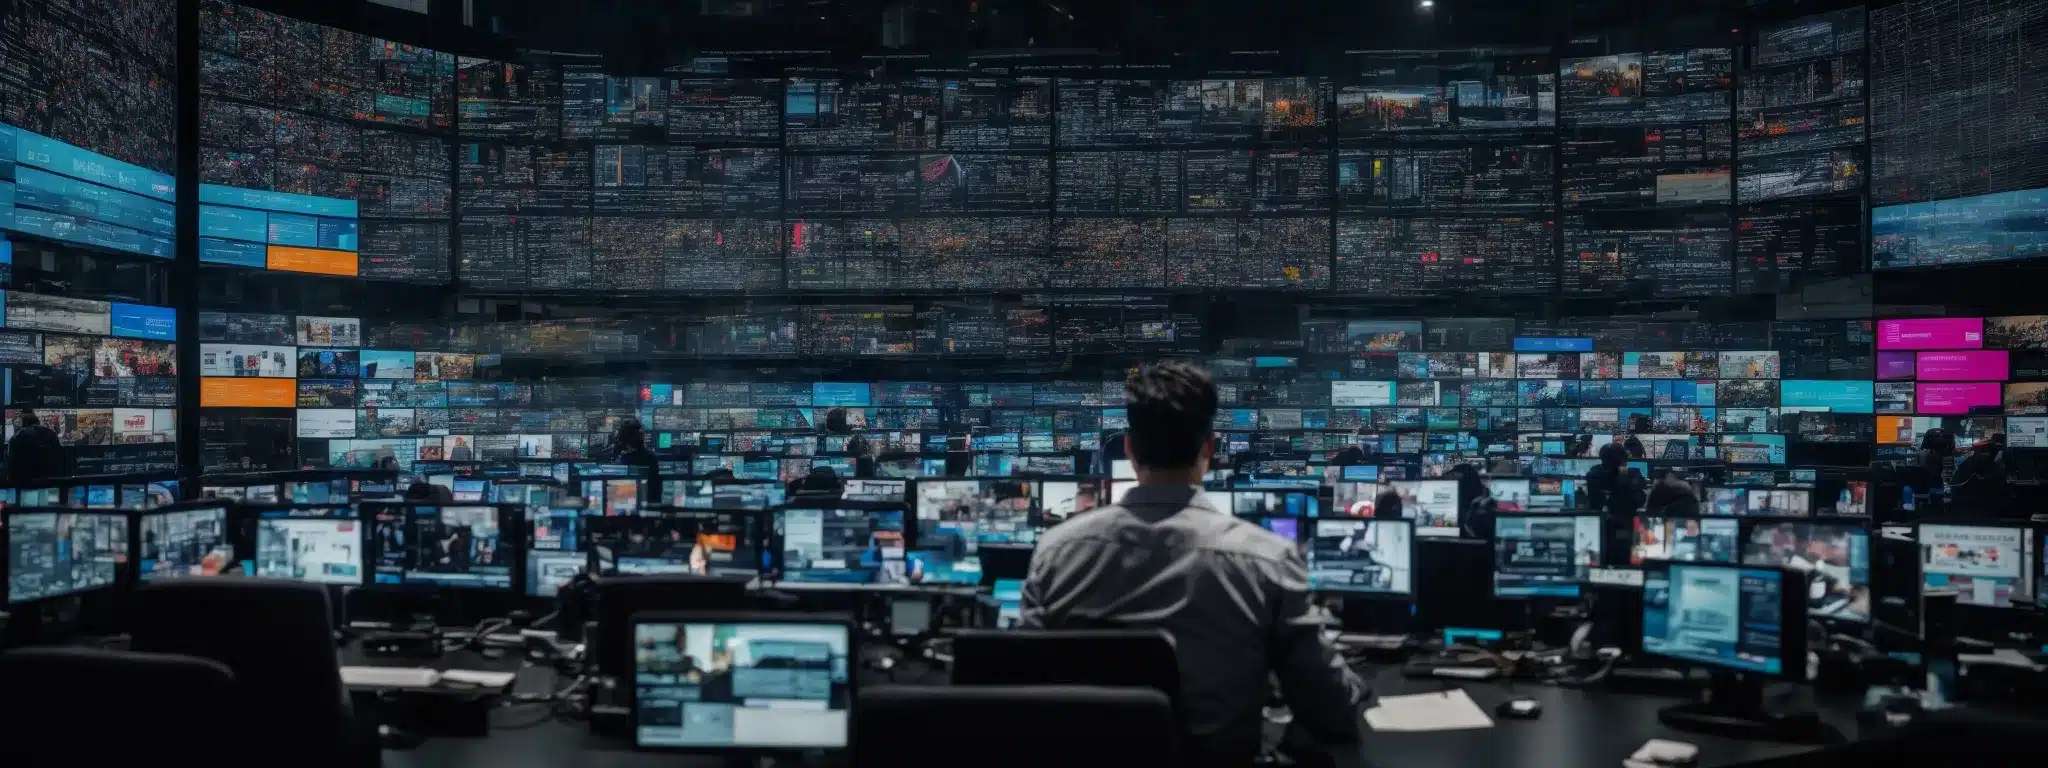 A Strategist Views A Massive Wall Of Digital Screens Displaying Social Media Analytics And Trends Across Various Platforms.